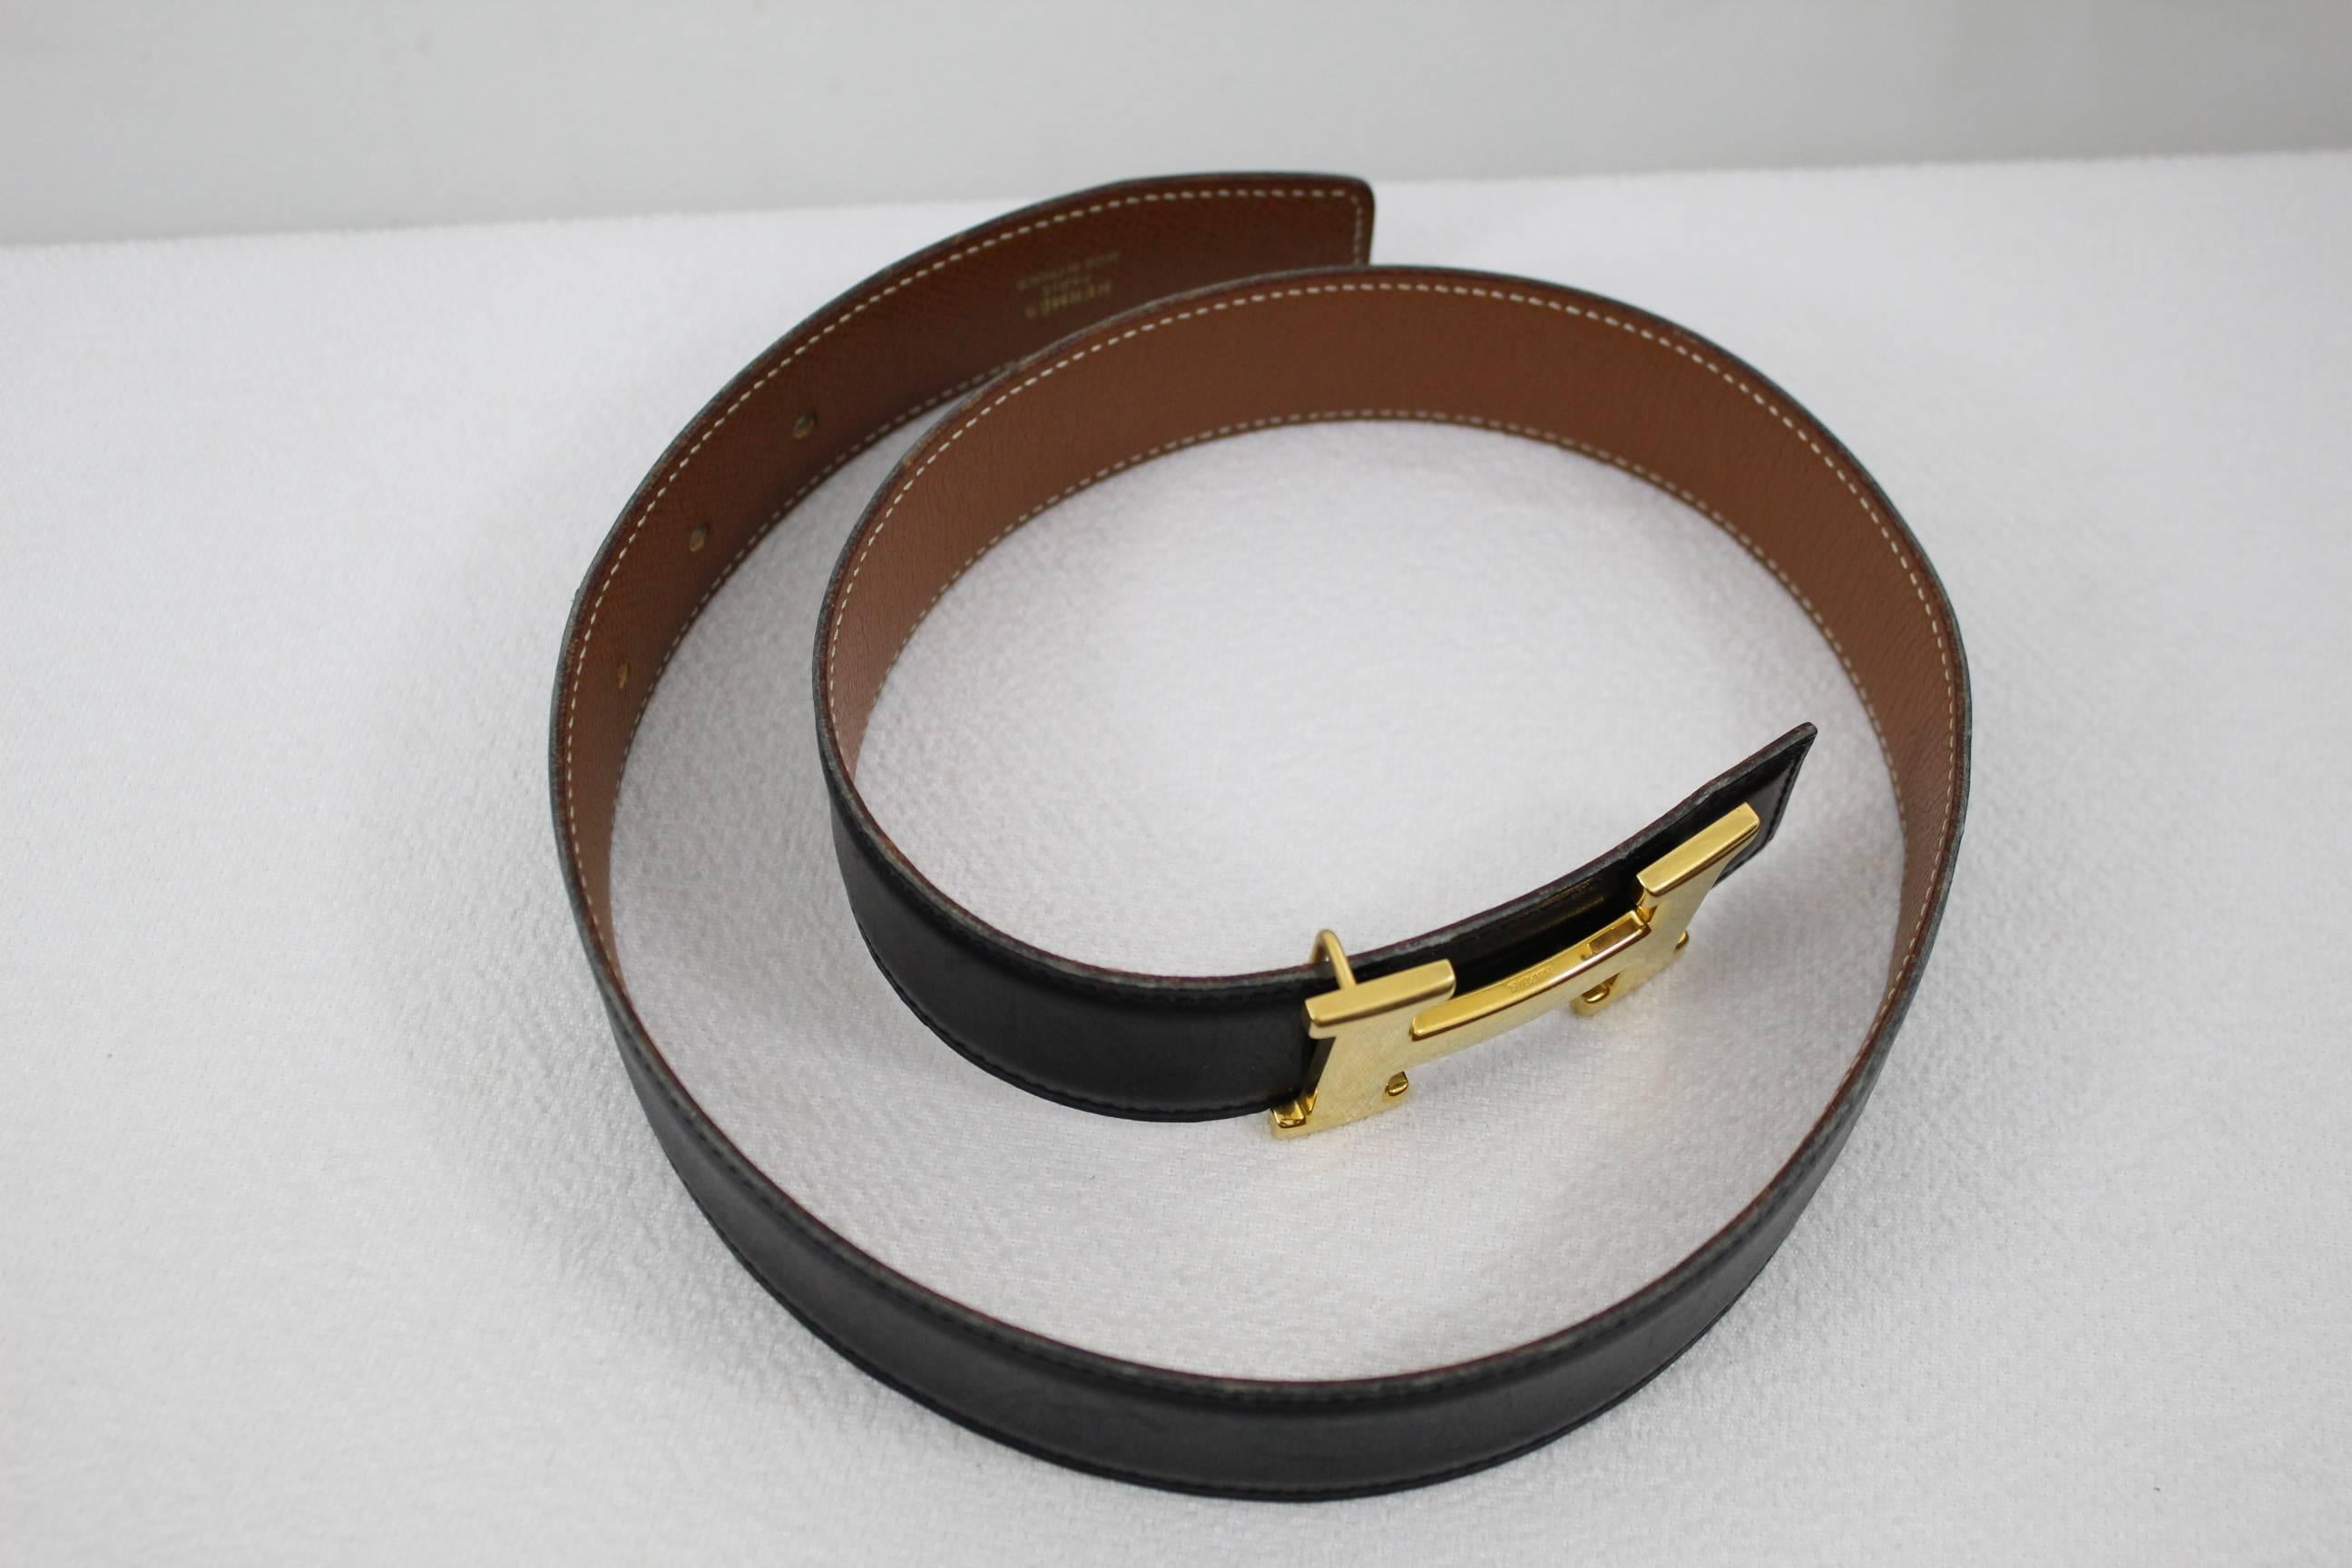 Hermes iconic belt in gold plated metal and gold/ black leather.

nice condition but some signs of wear, small scratches in the buckle (can be polished at hermes) and some signs of use in the leather.

Size 27 (68 centimeters)